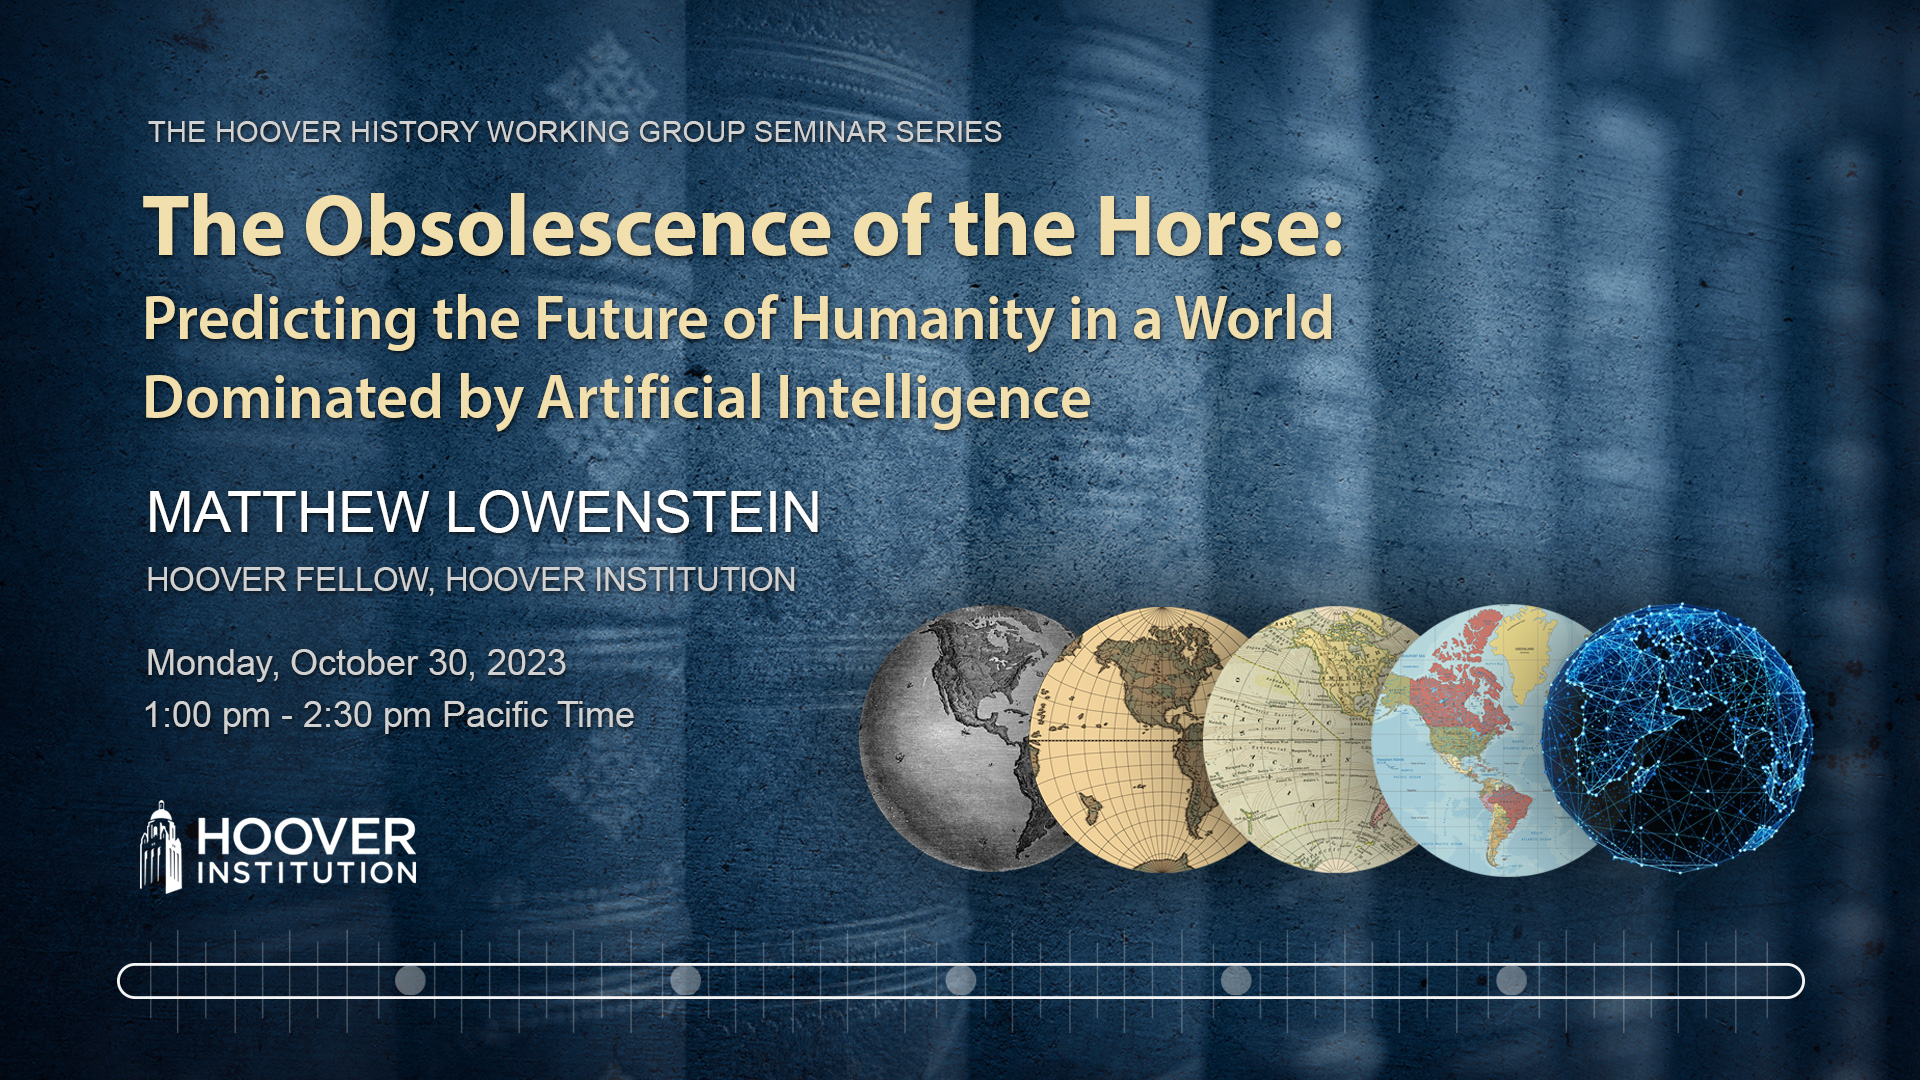 The Obsolescence of the Horse: Predicting the Future of Humanity in a World Dominated by Artificial Intelligence